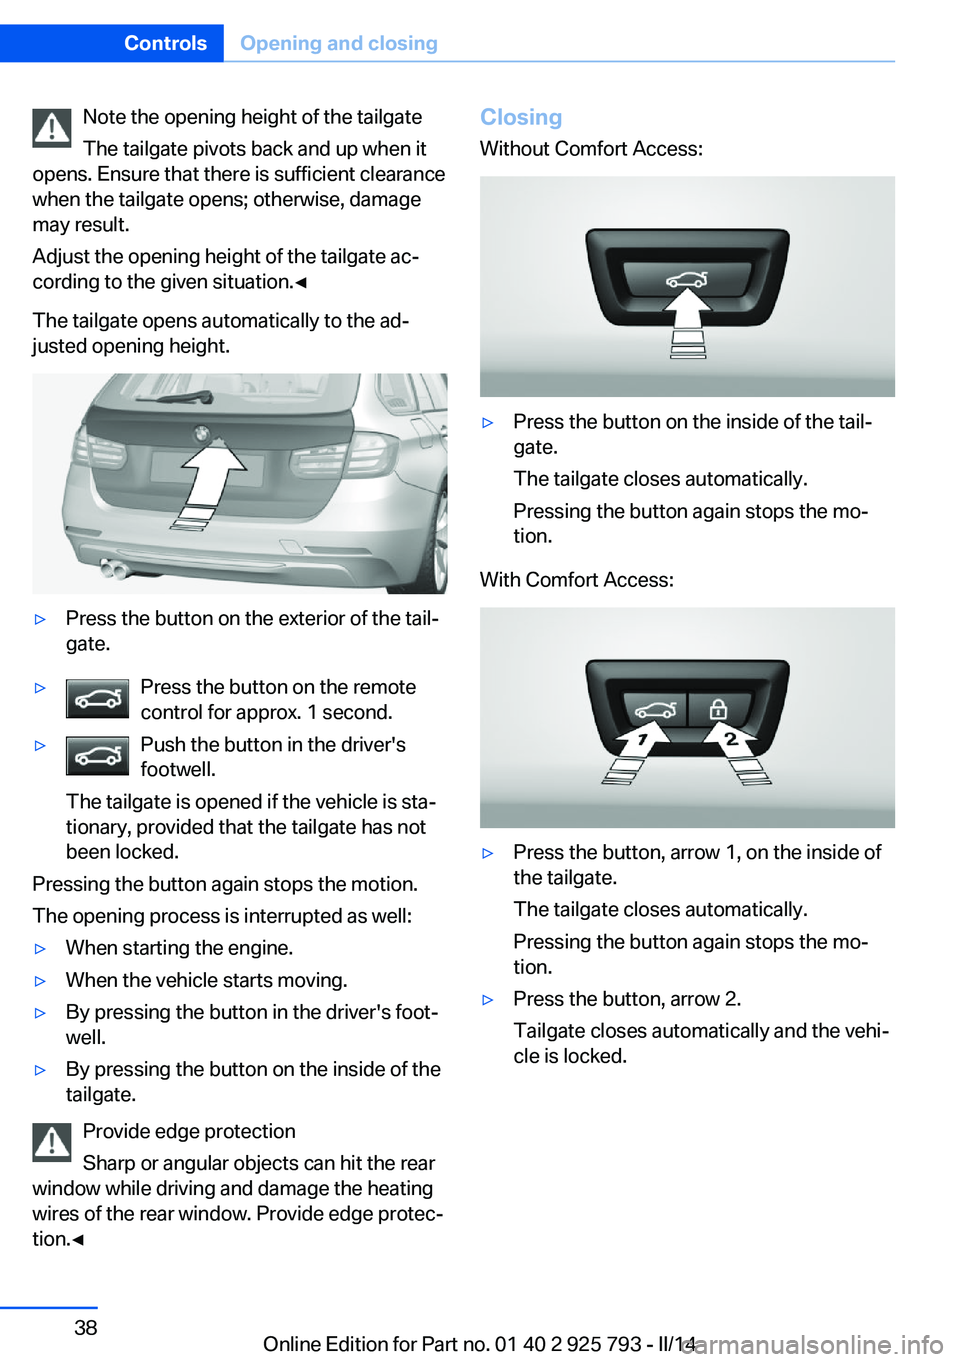 BMW 328I XDRIVE SPORTS WAGON 2014  Owners Manual Note the opening height of the tailgate
The tailgate pivots back and up when it
opens. Ensure that there is sufficient clearance
when the tailgate opens; otherwise, damage
may result.
Adjust the openi